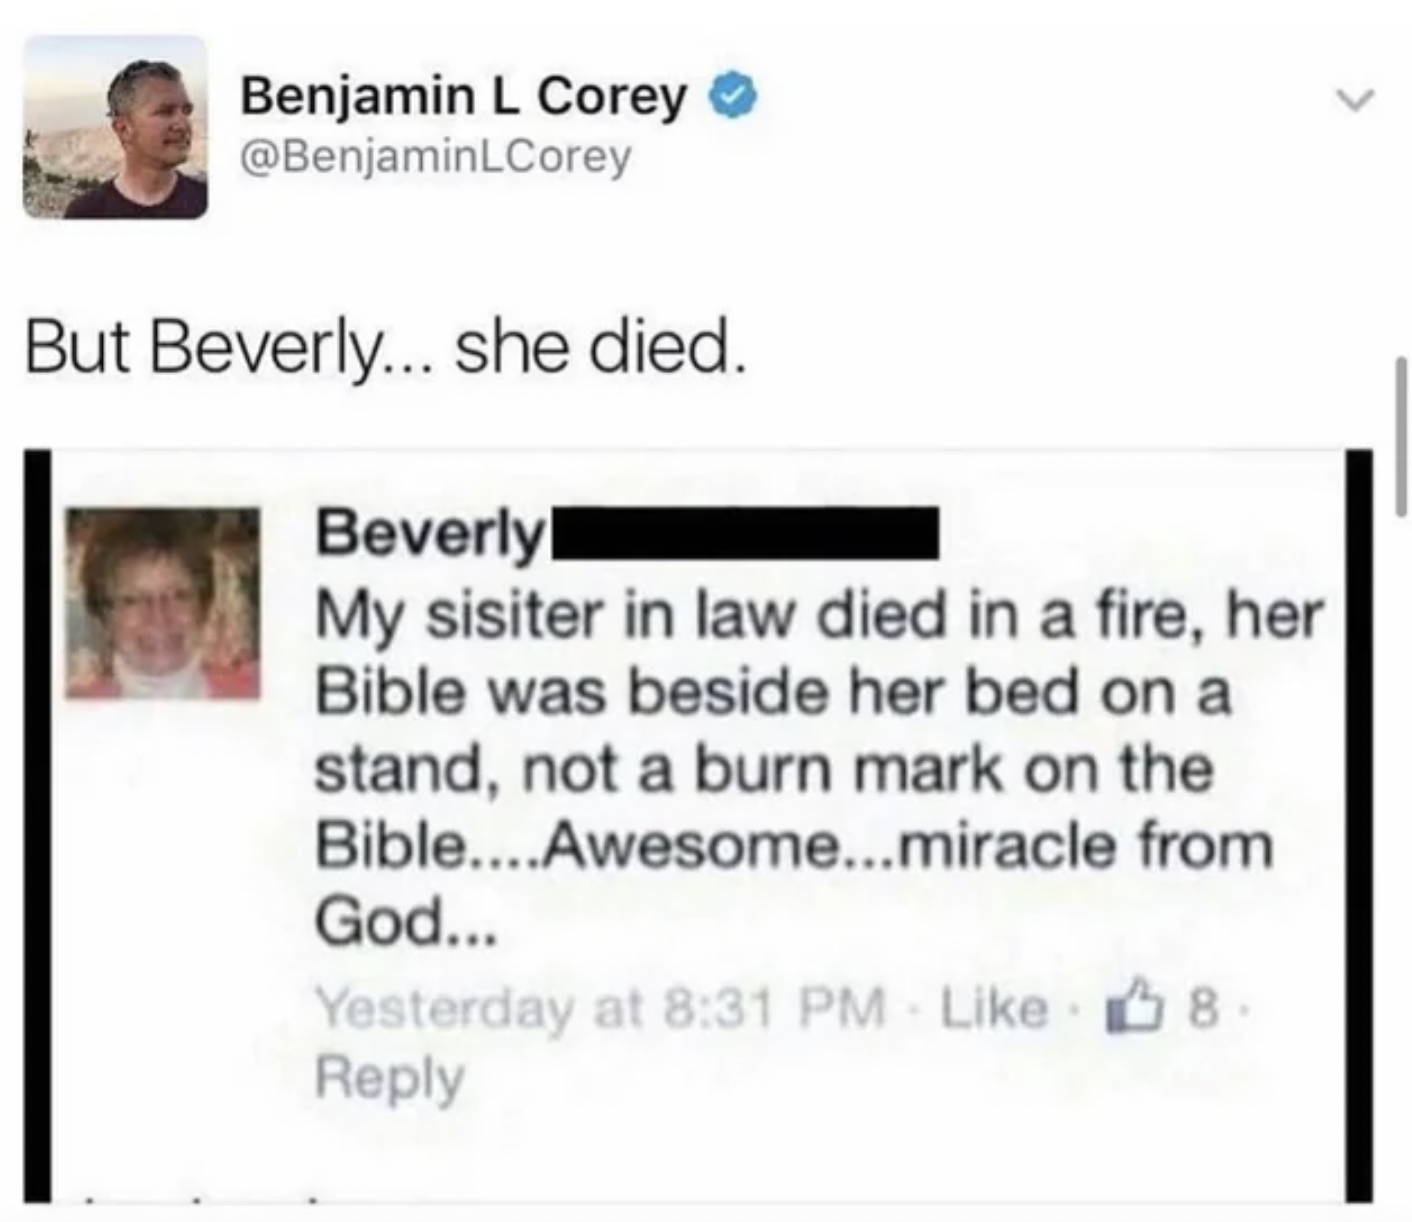 facepalms paper - But Beverly... she died. Beverly My sisiter in law died in a fire, her Bible was beside her bed on a stand, not a burn mark on the Bible....Awesome...miracle from God... Yesterday at 8.